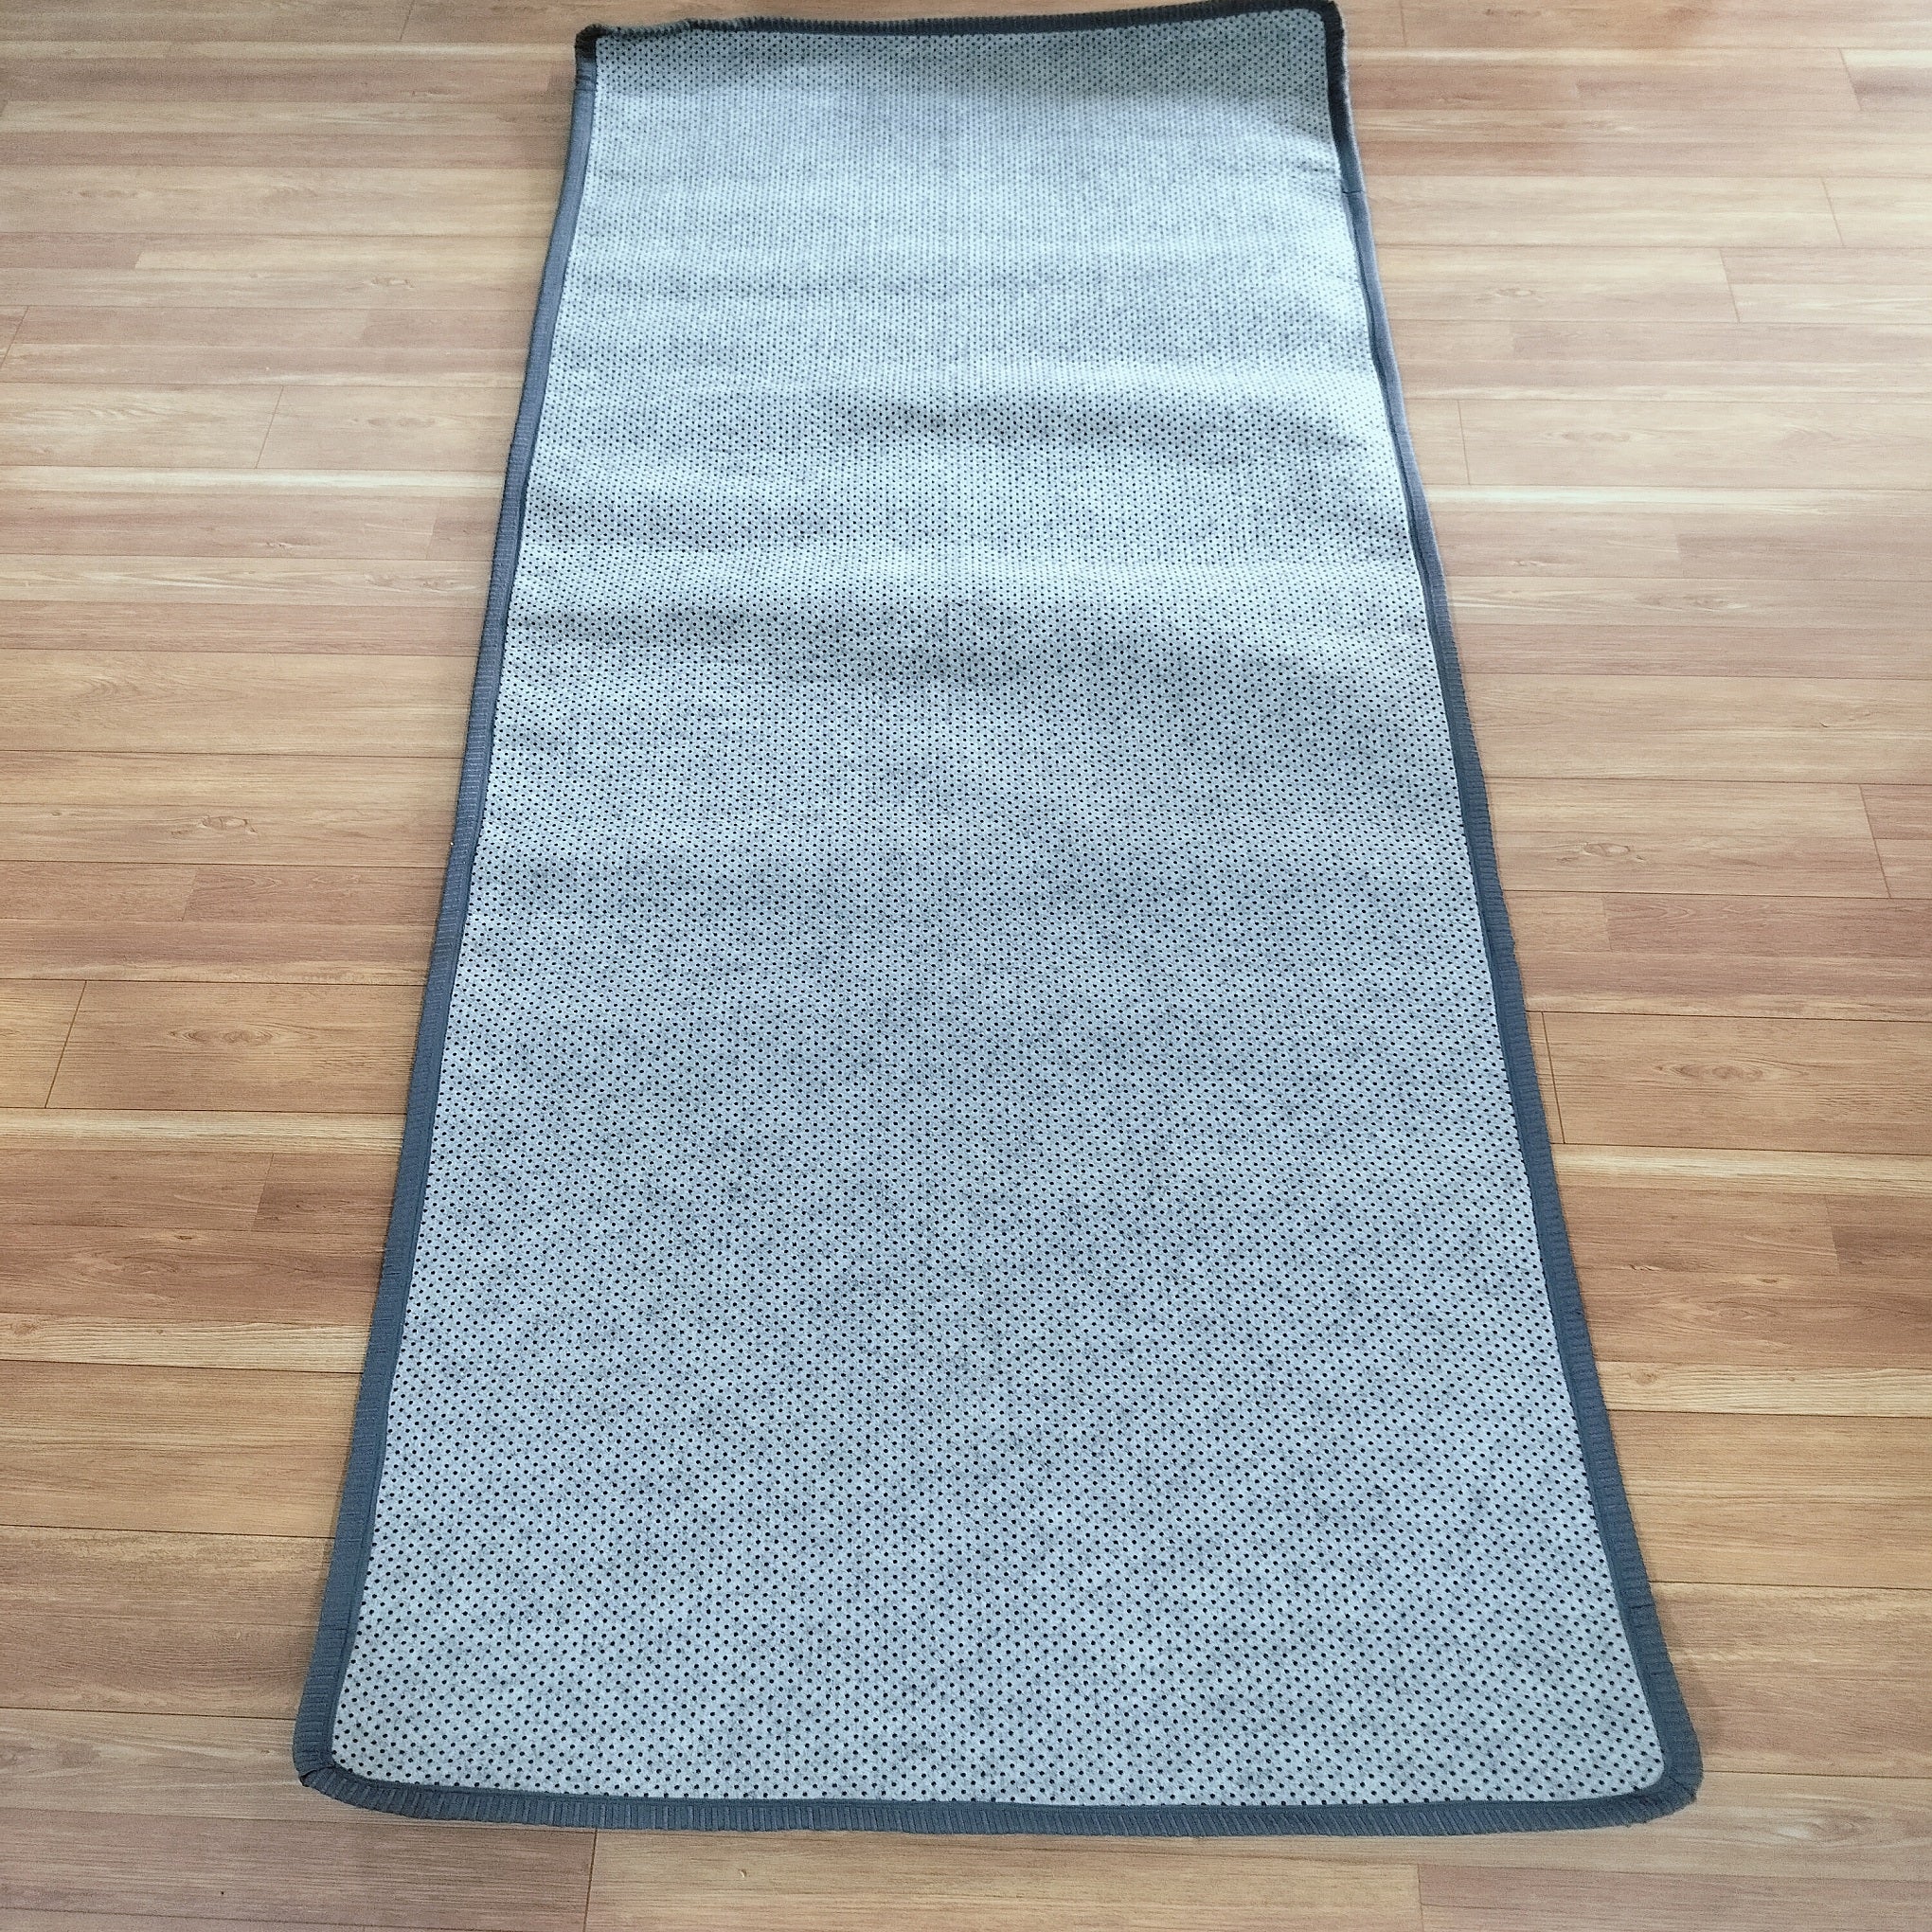 DVAAR COTTON  YOGA MAT PEARL GREY COLOUR WASHABLE NATURAL MAT  5MM LINES FOR ALIGNMENT HOME YOGA  WORKOUTS SUSTAINABLE MATS GEMSTONE COLLECTION.